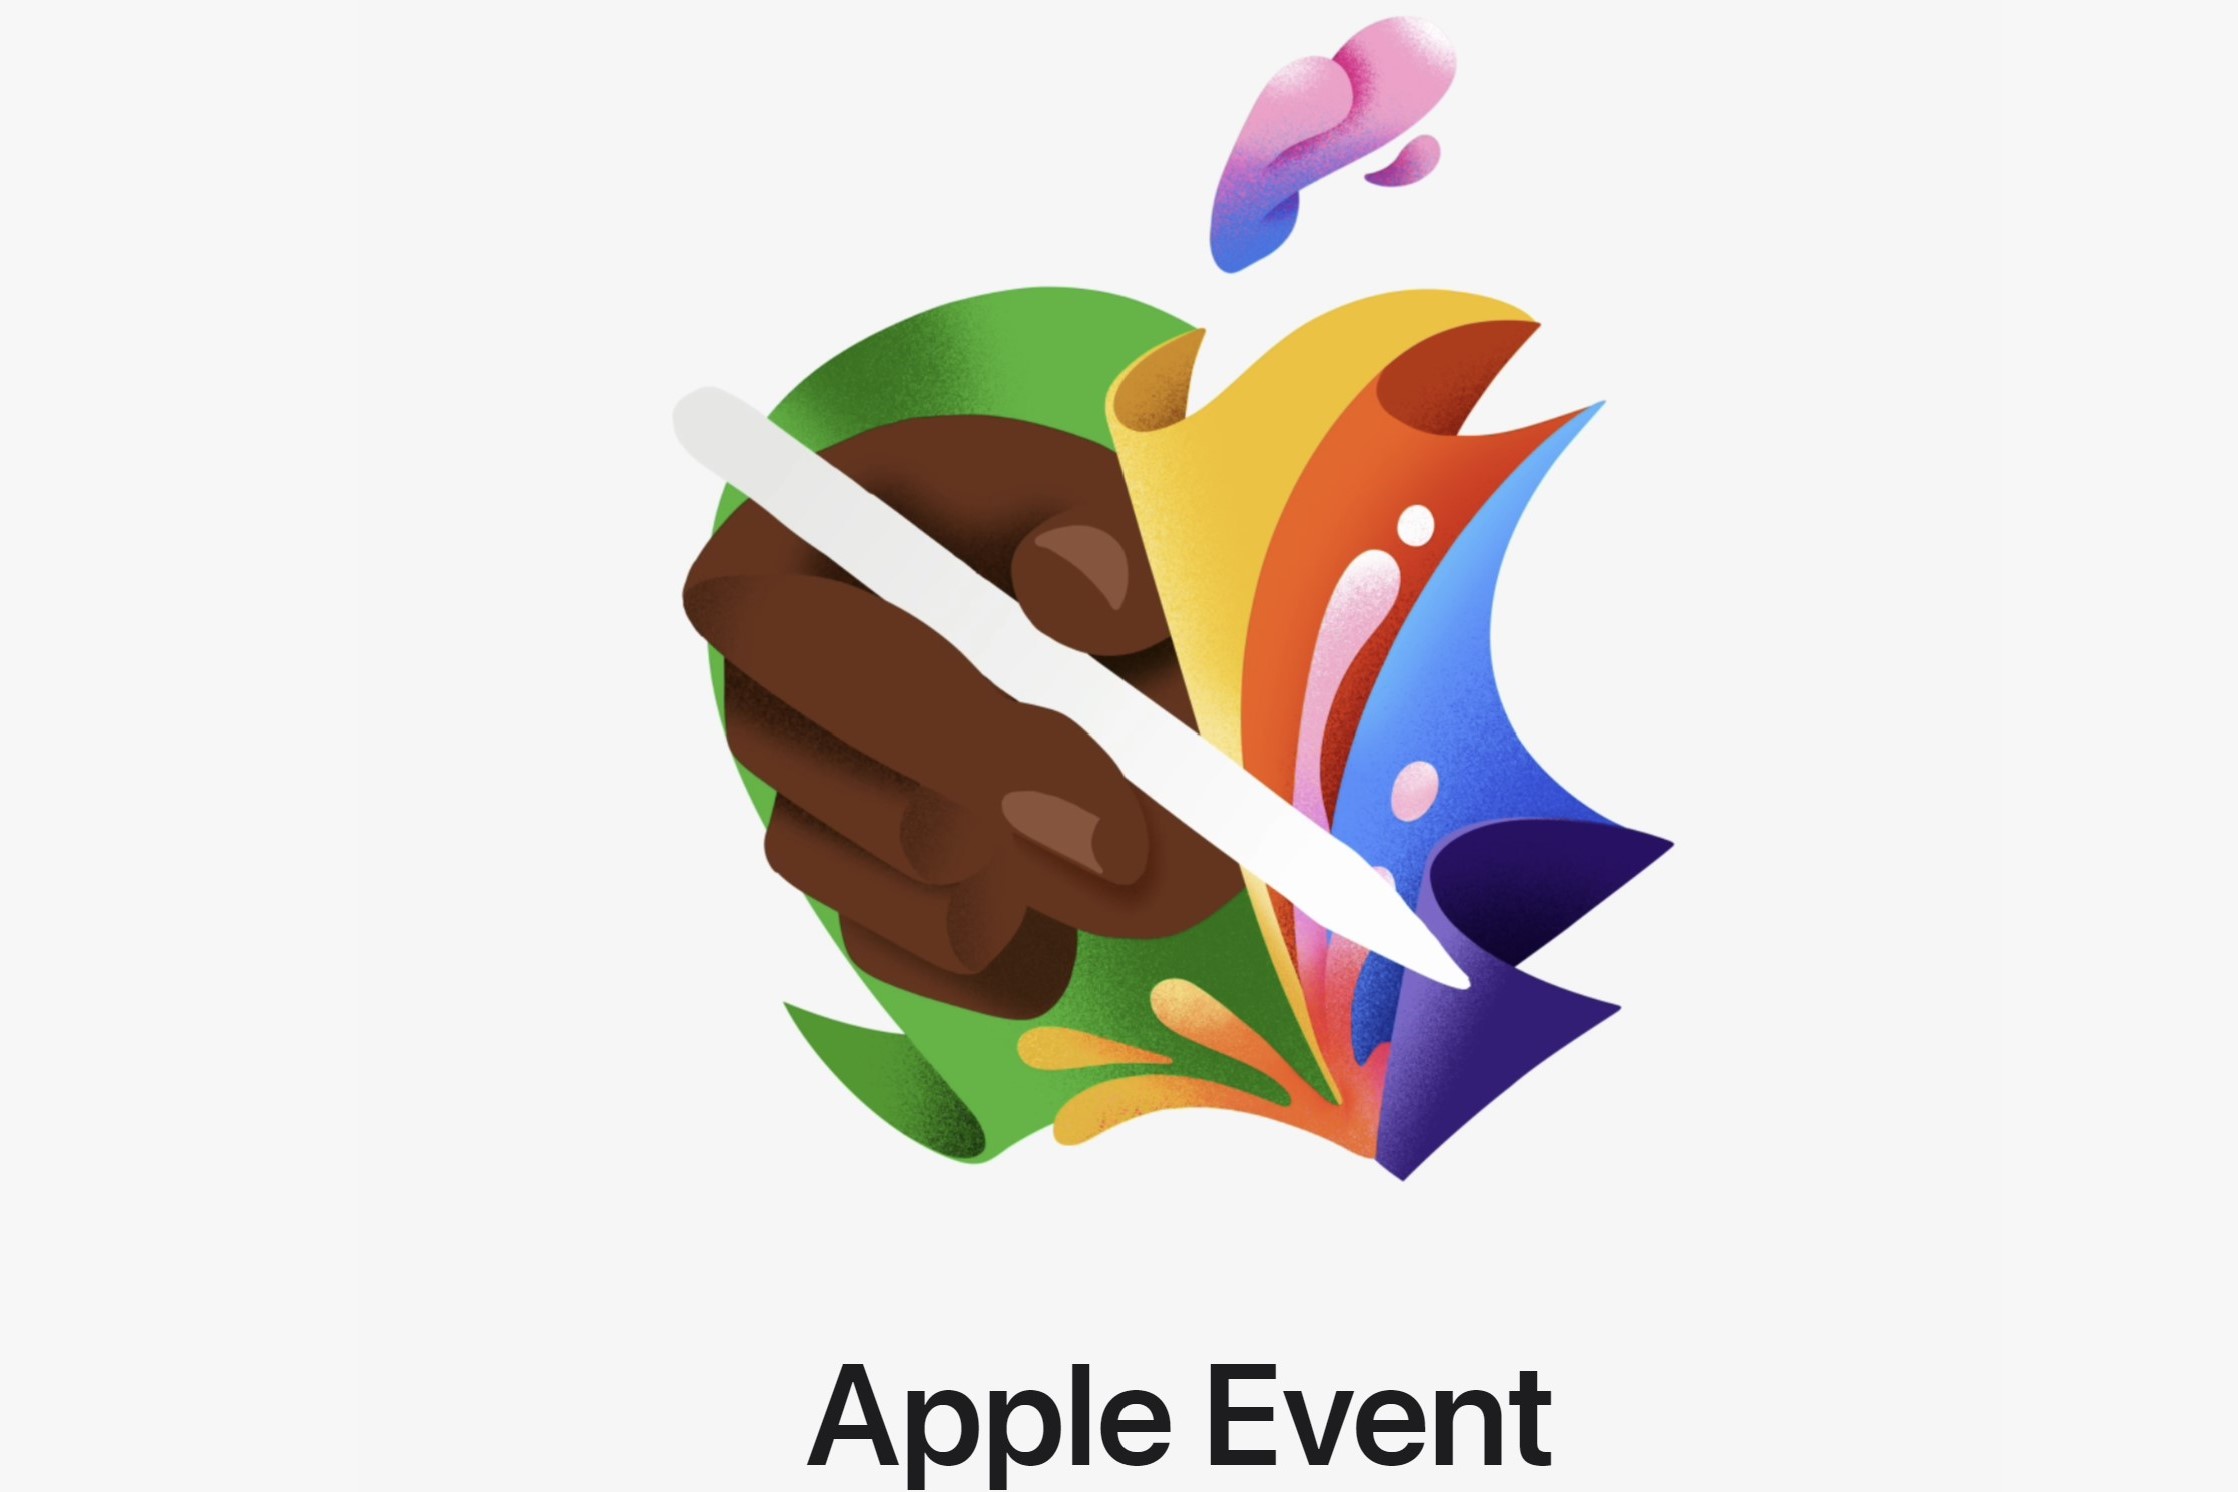 Artwork for Apple's May 7 event.